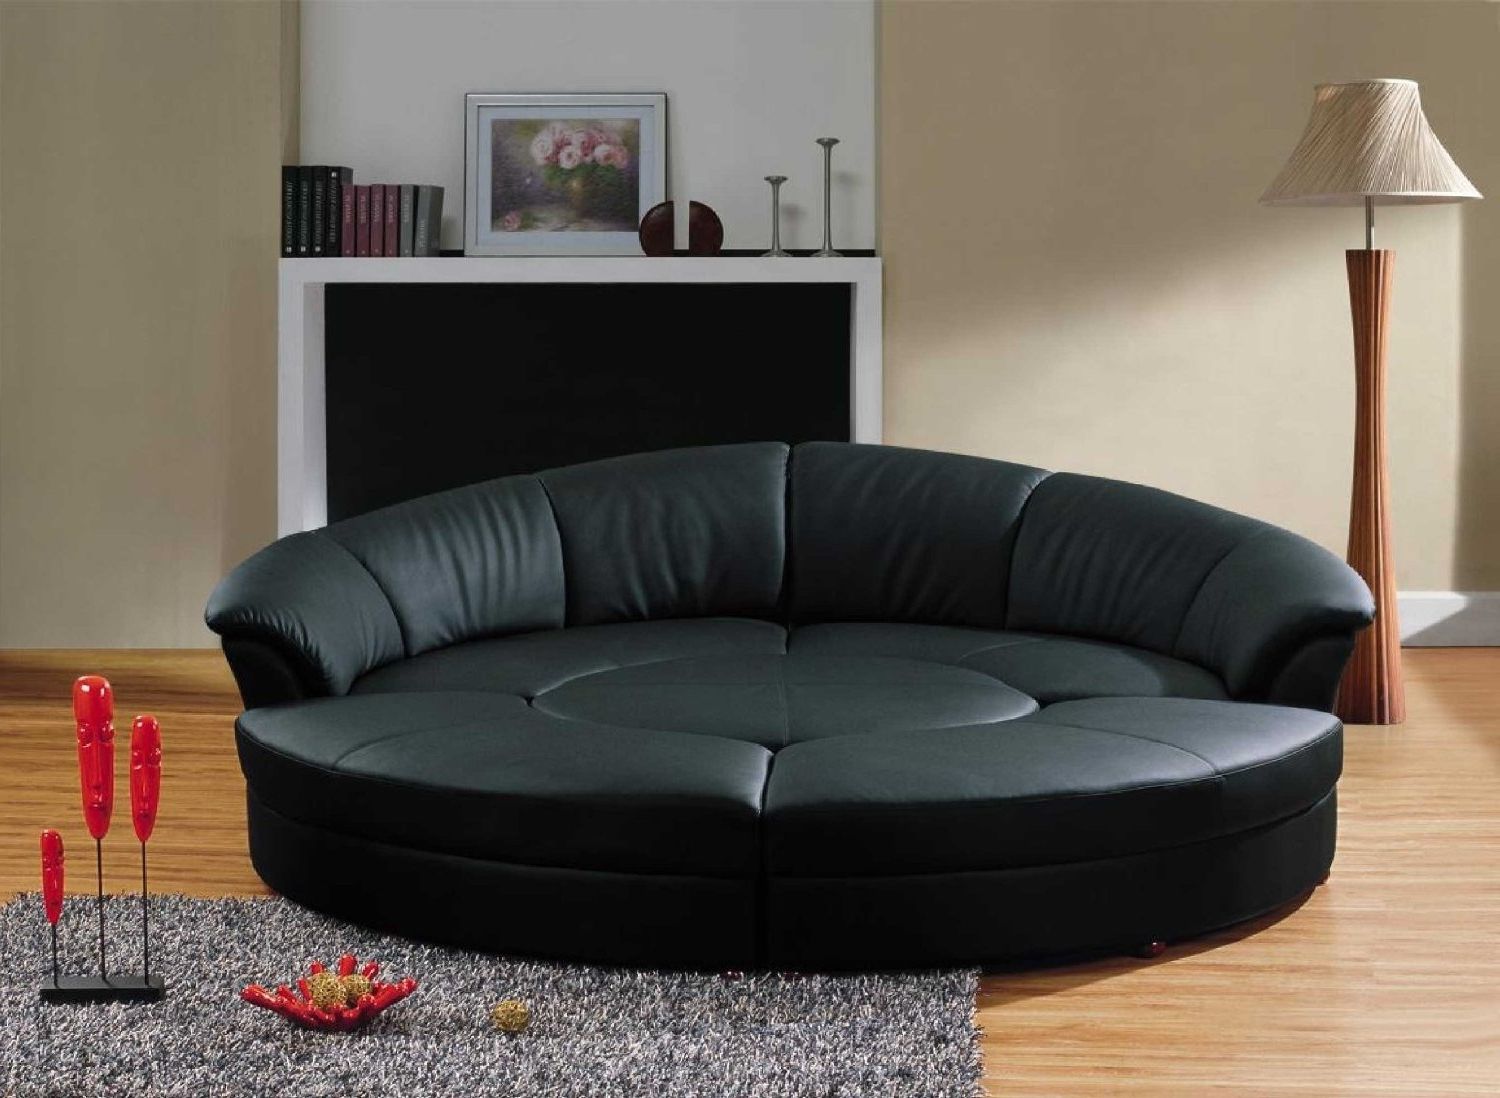 Circular Sofa Chairs With Regard To 2017 Sofa : Round Sofa Chair Leon's Small Round Sofa Chair Round Sofa (View 4 of 15)